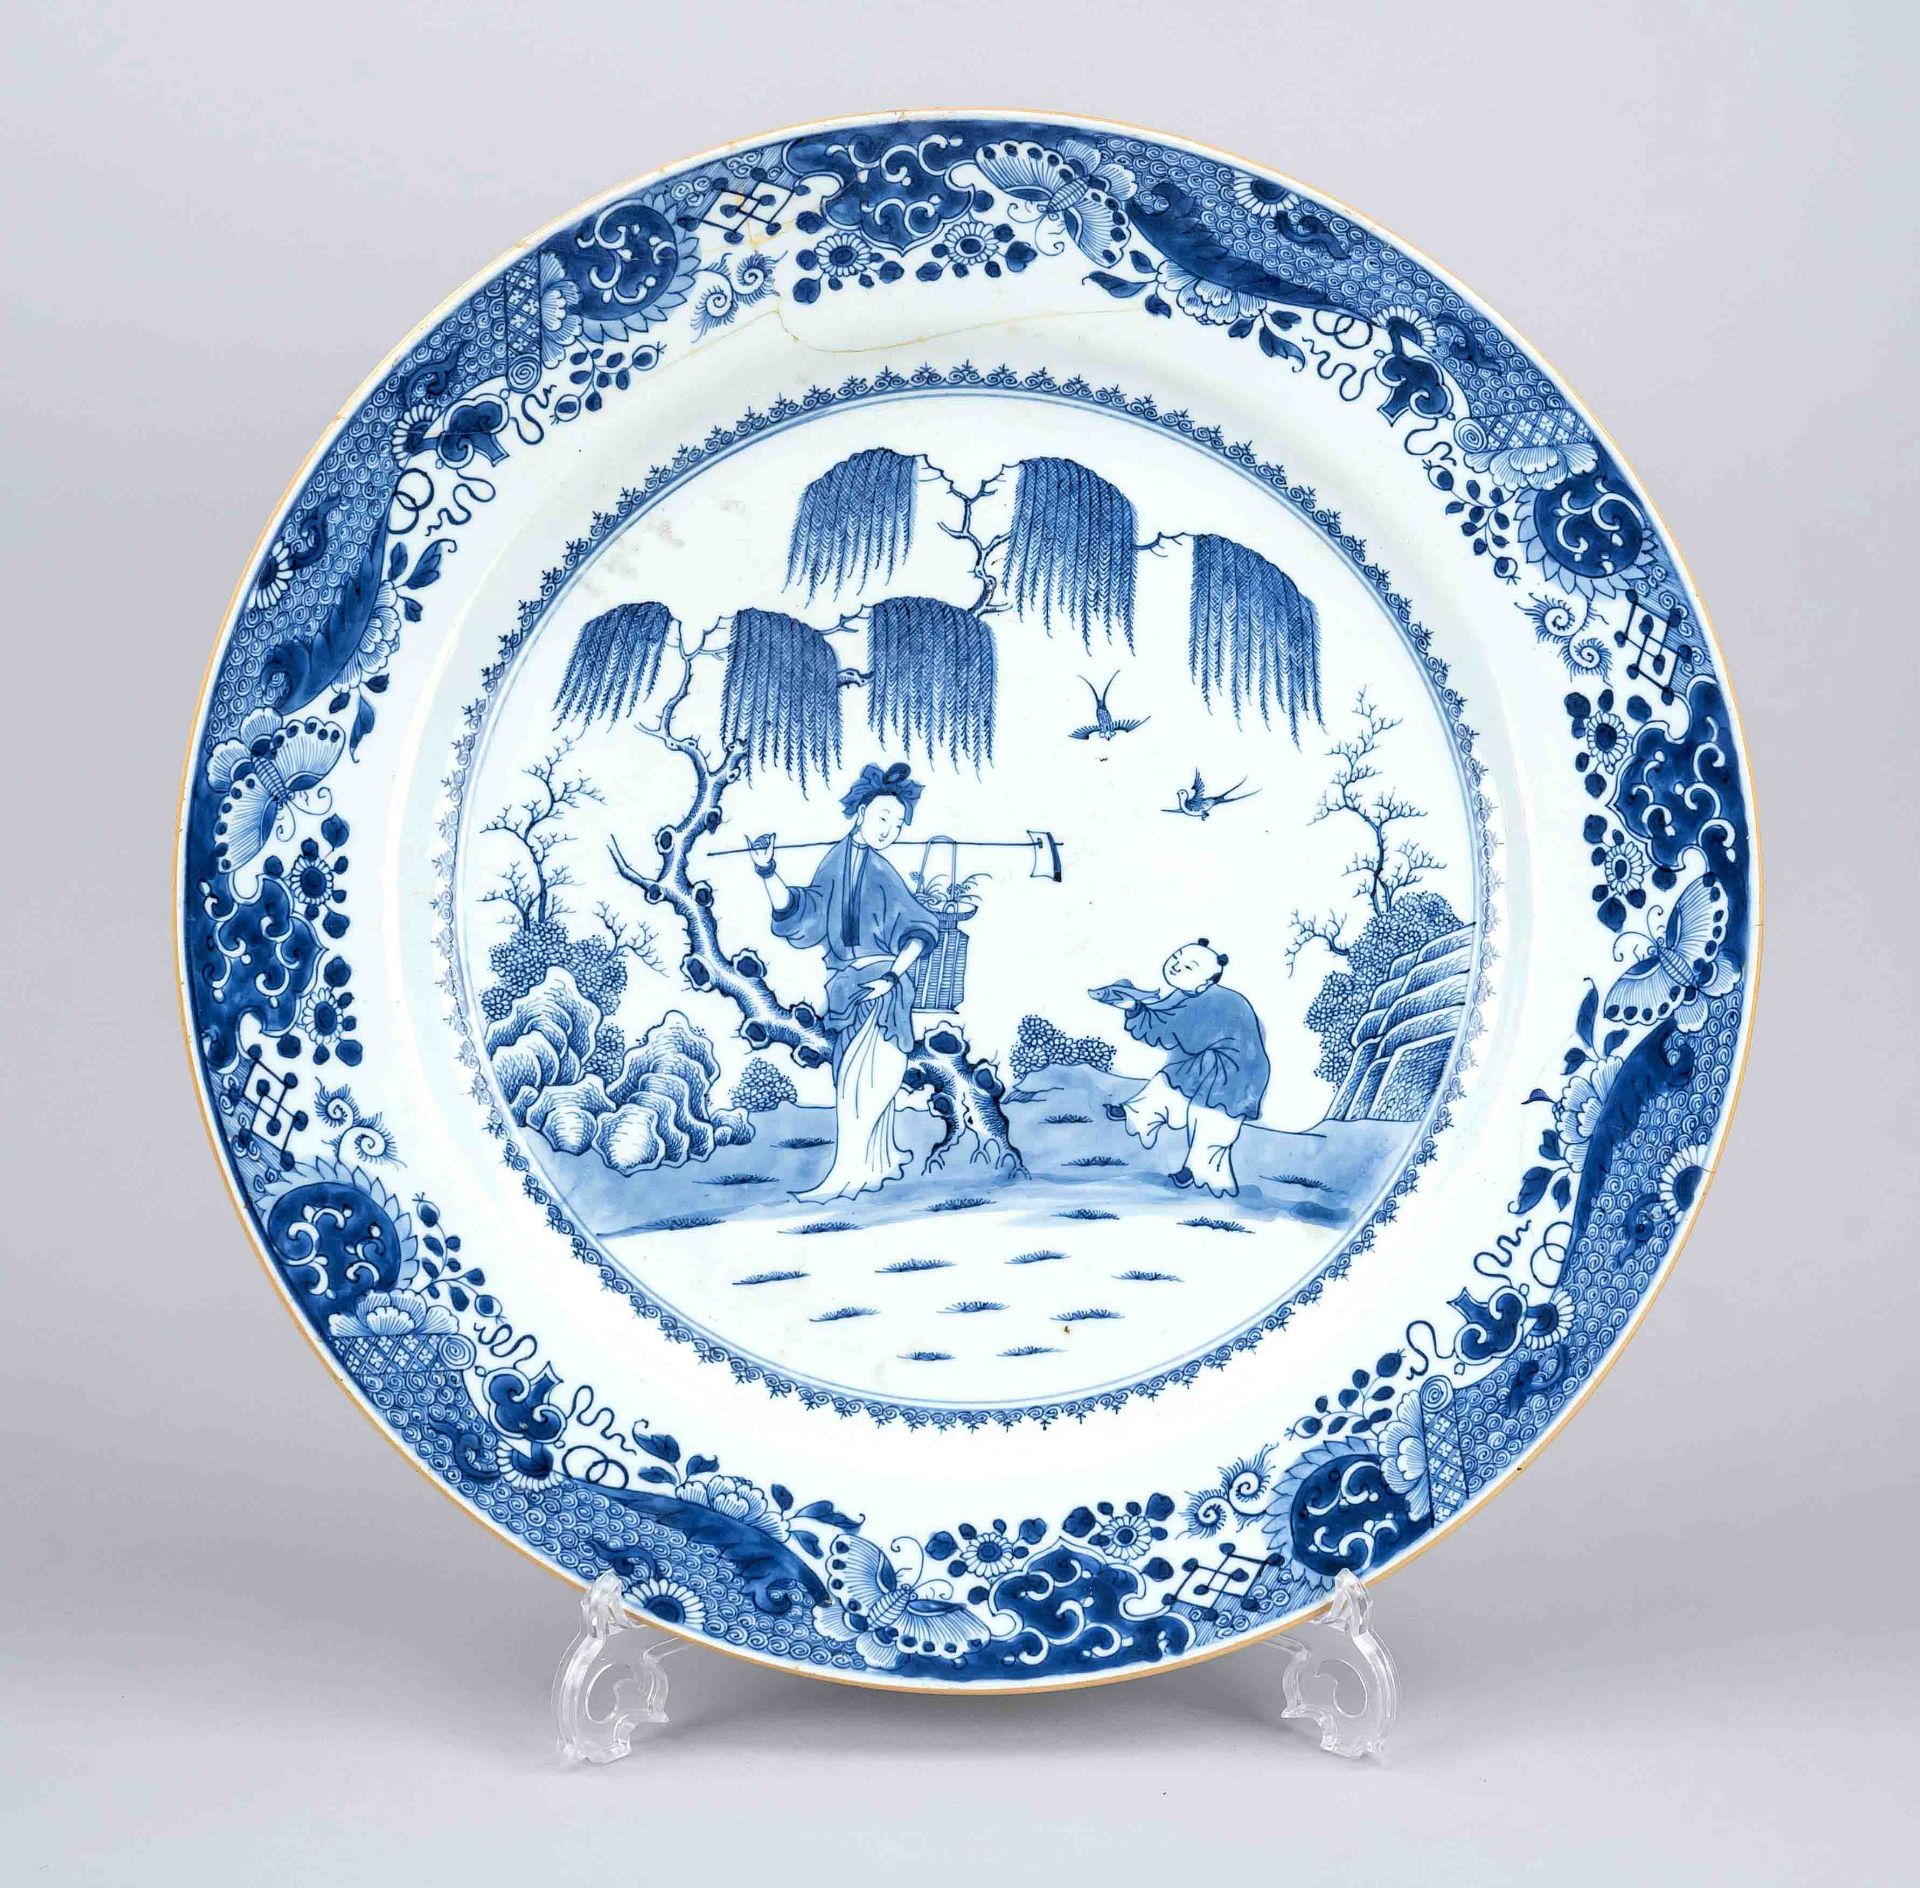 Large export plate, China, Qing dynasty(1644-1911), Qianlong period(1735--1796) 18th century,